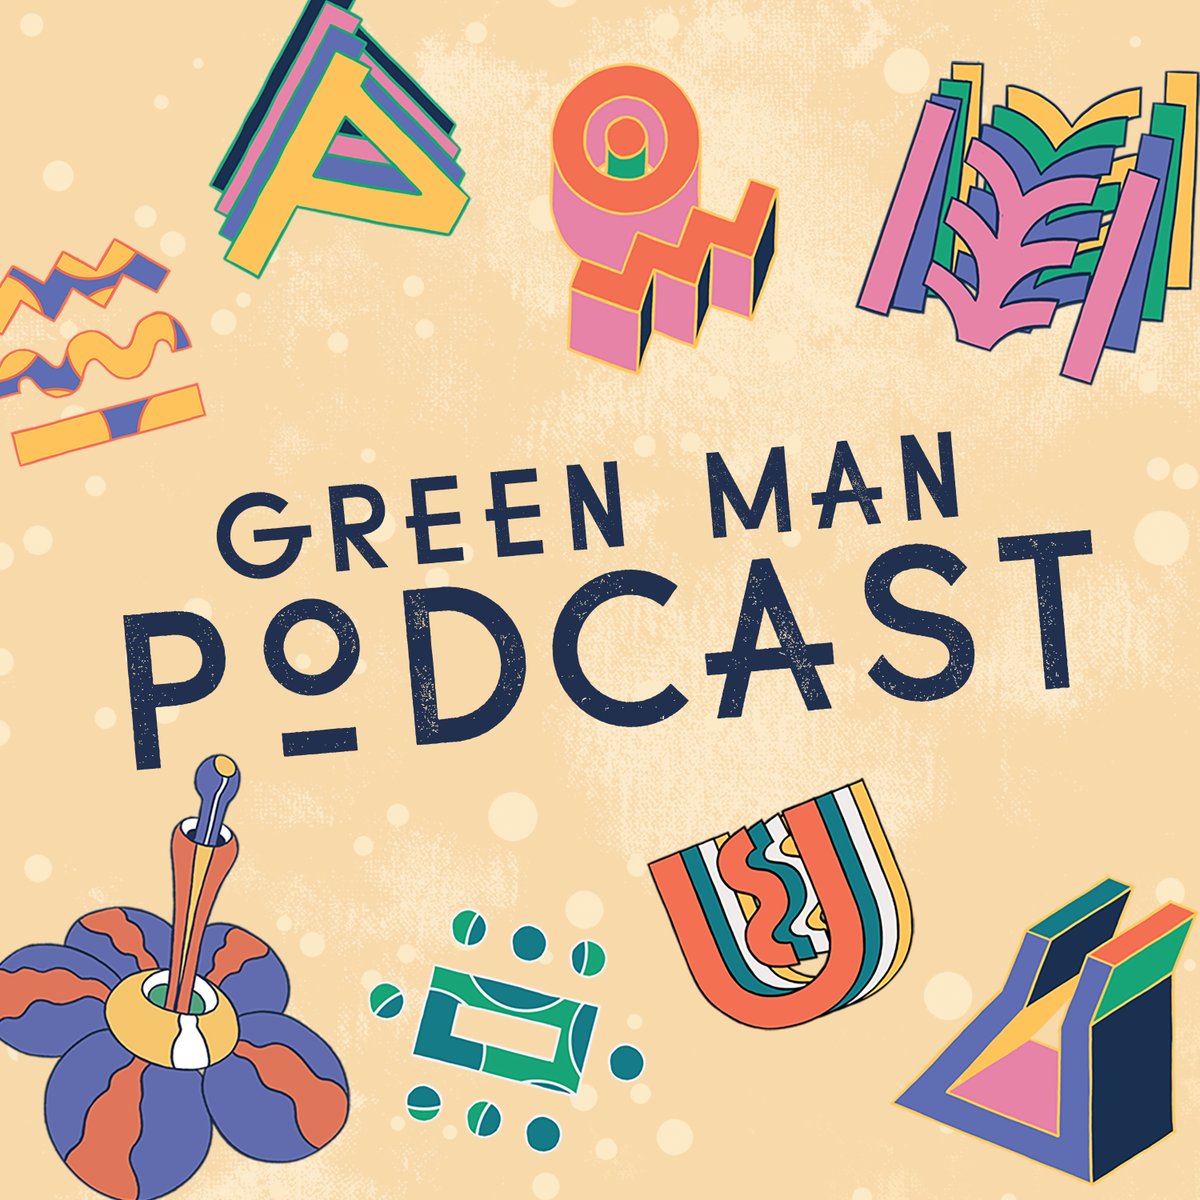 Drum roll! 🥁 We’re buzzed to launch our brand spanking new GM Podcast series! The inaugural episode is a sneak peek at what’s in store at GM23, told by our pals @caitlinmoran, @petepaphides, @PictishTrail, @nuharubyra, @melin_melynband & Esyllt Sears → gmfe.st/podcast